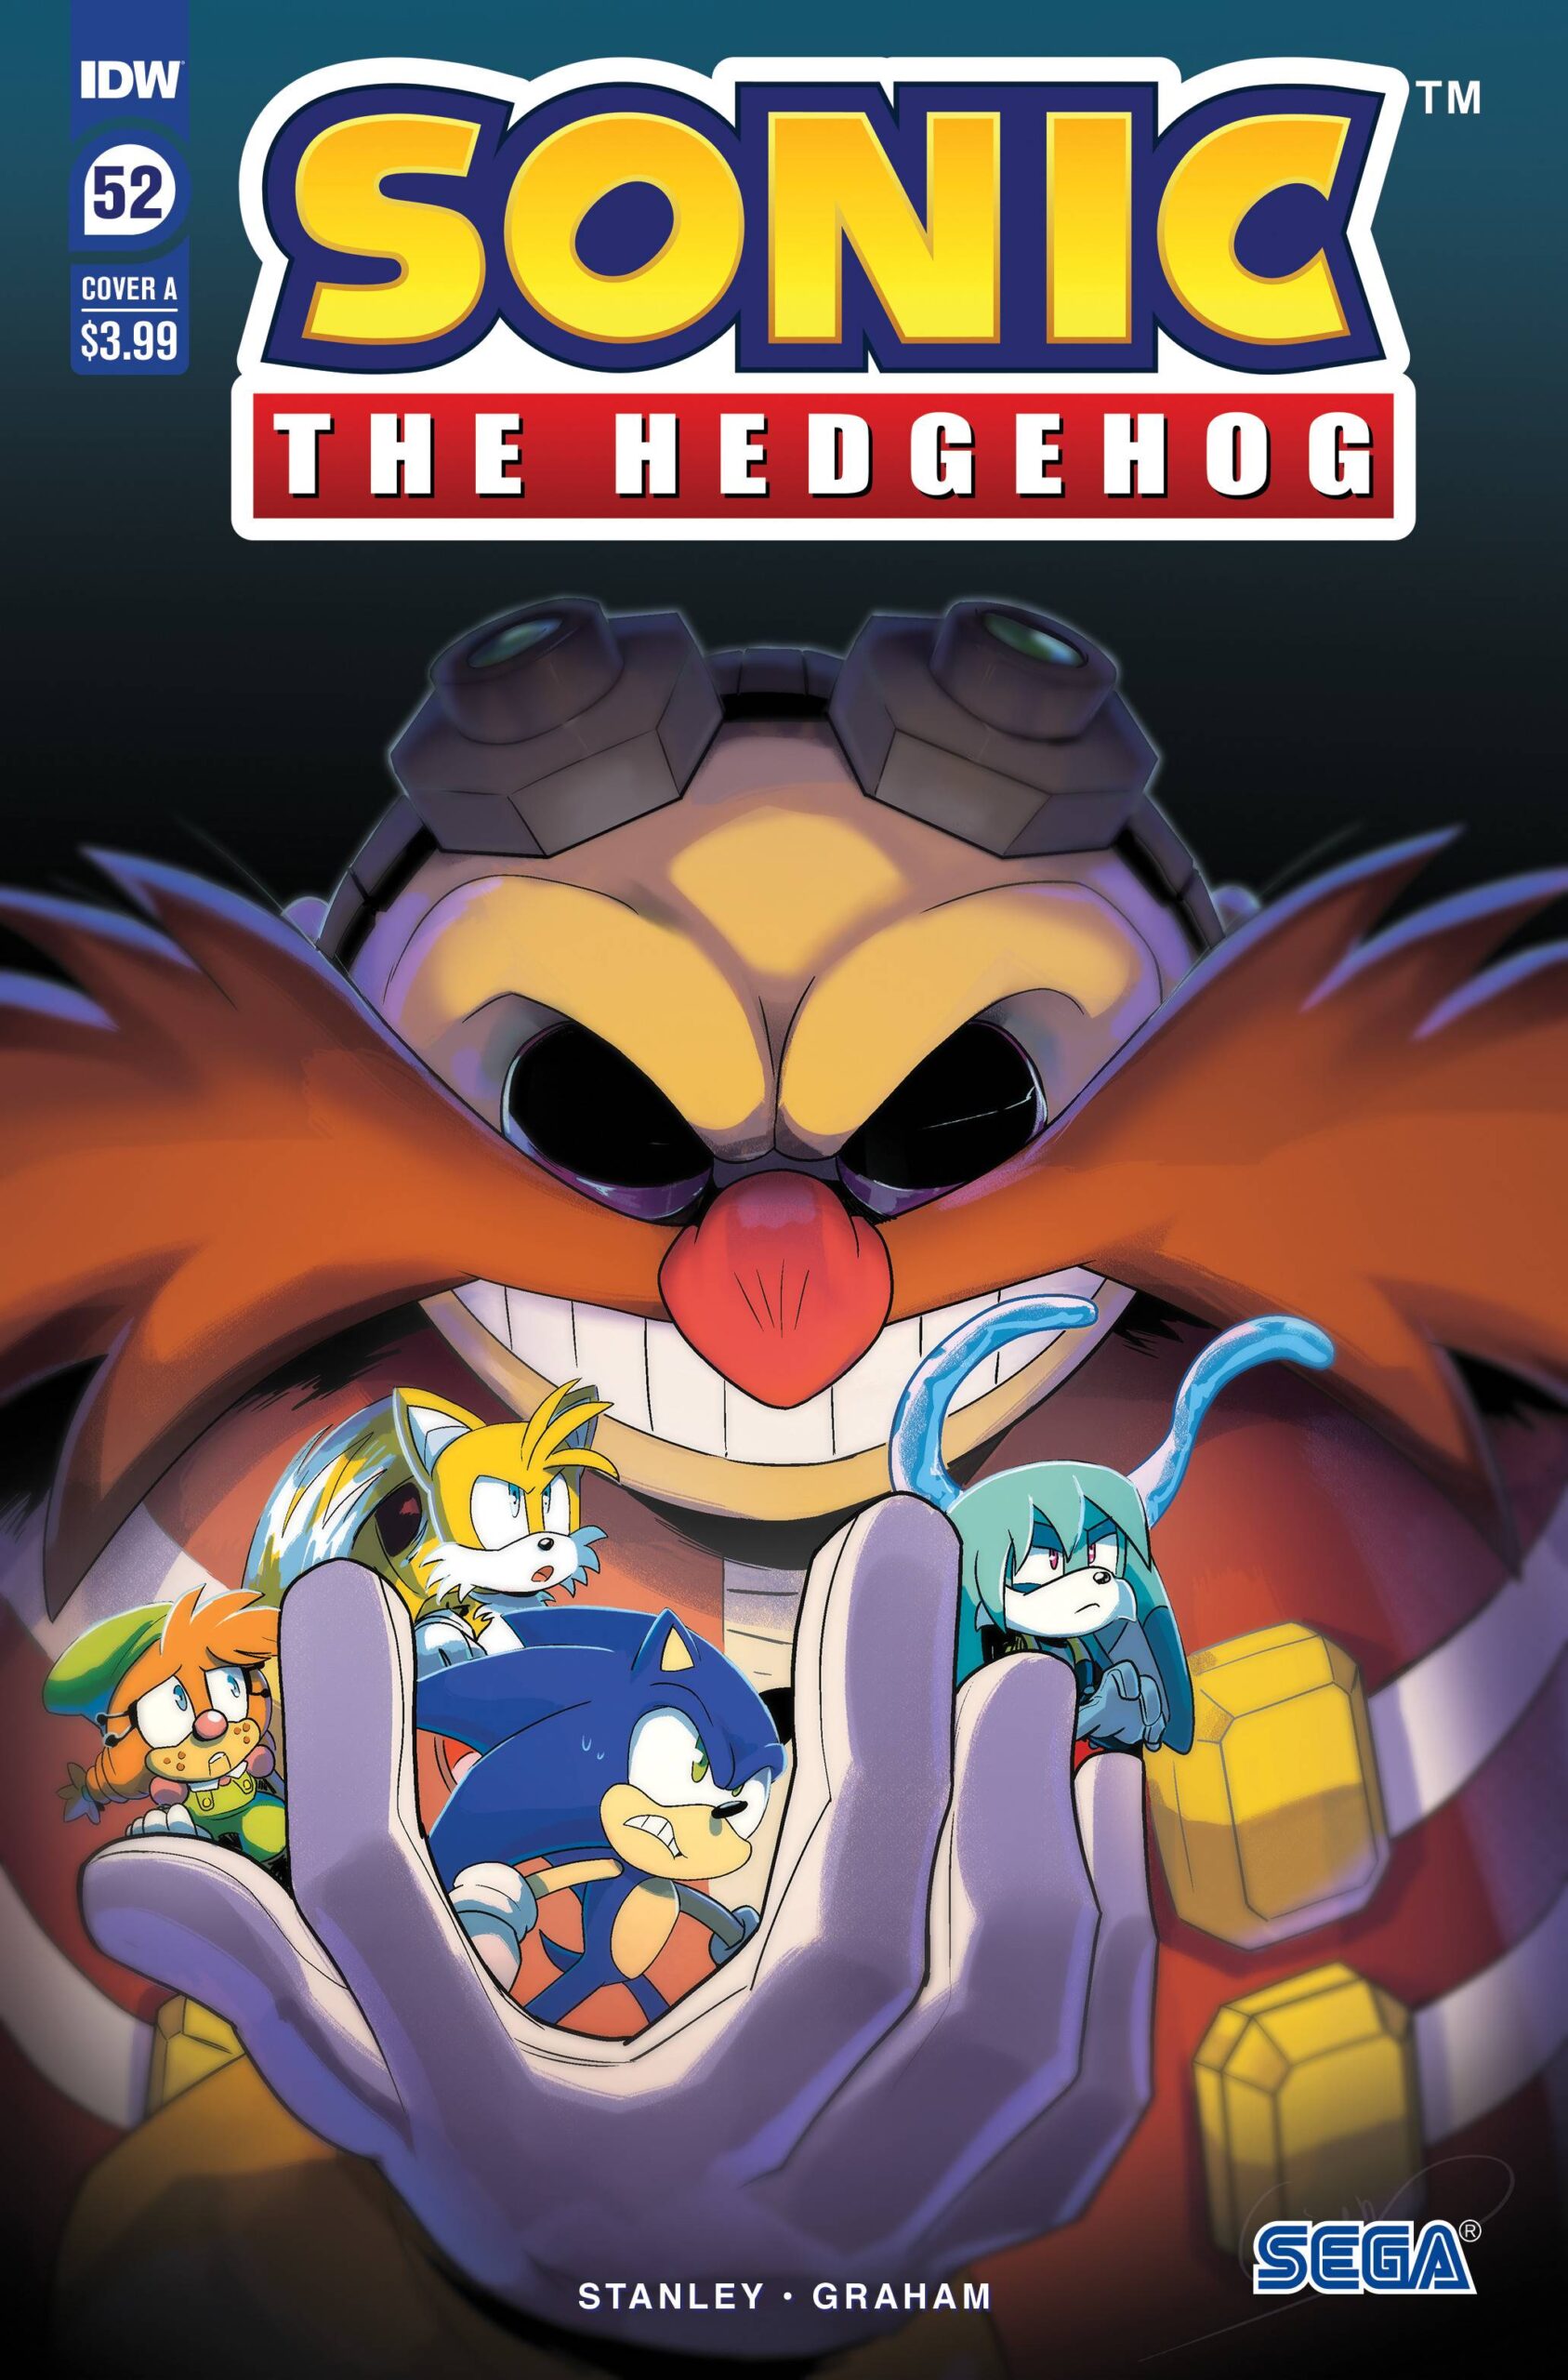 Sonic The Hedgehog #52 Cover A